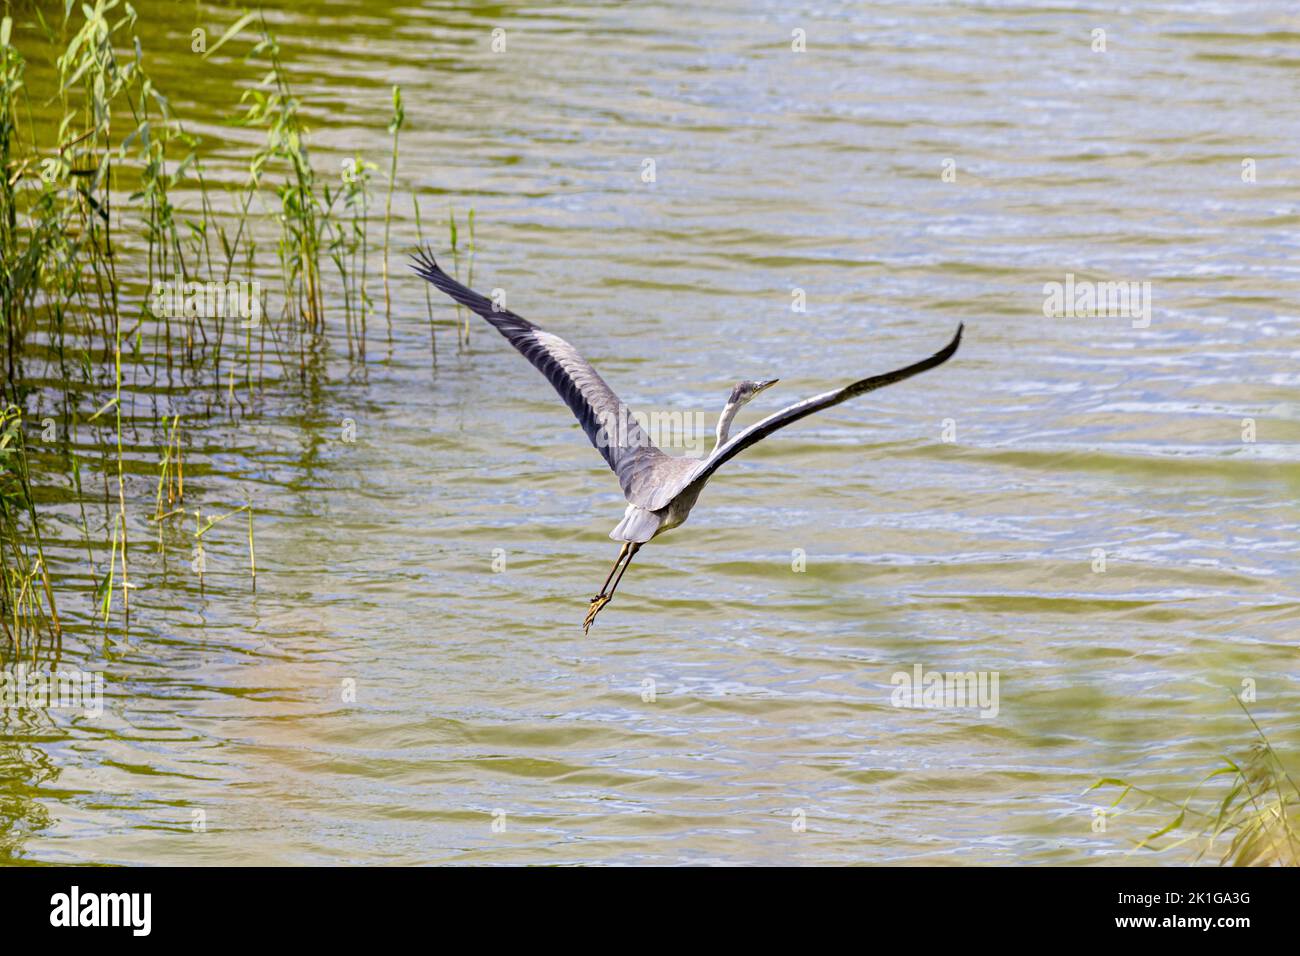 A gray heron takes off from the lake between the sparse reeds. Stock Photo